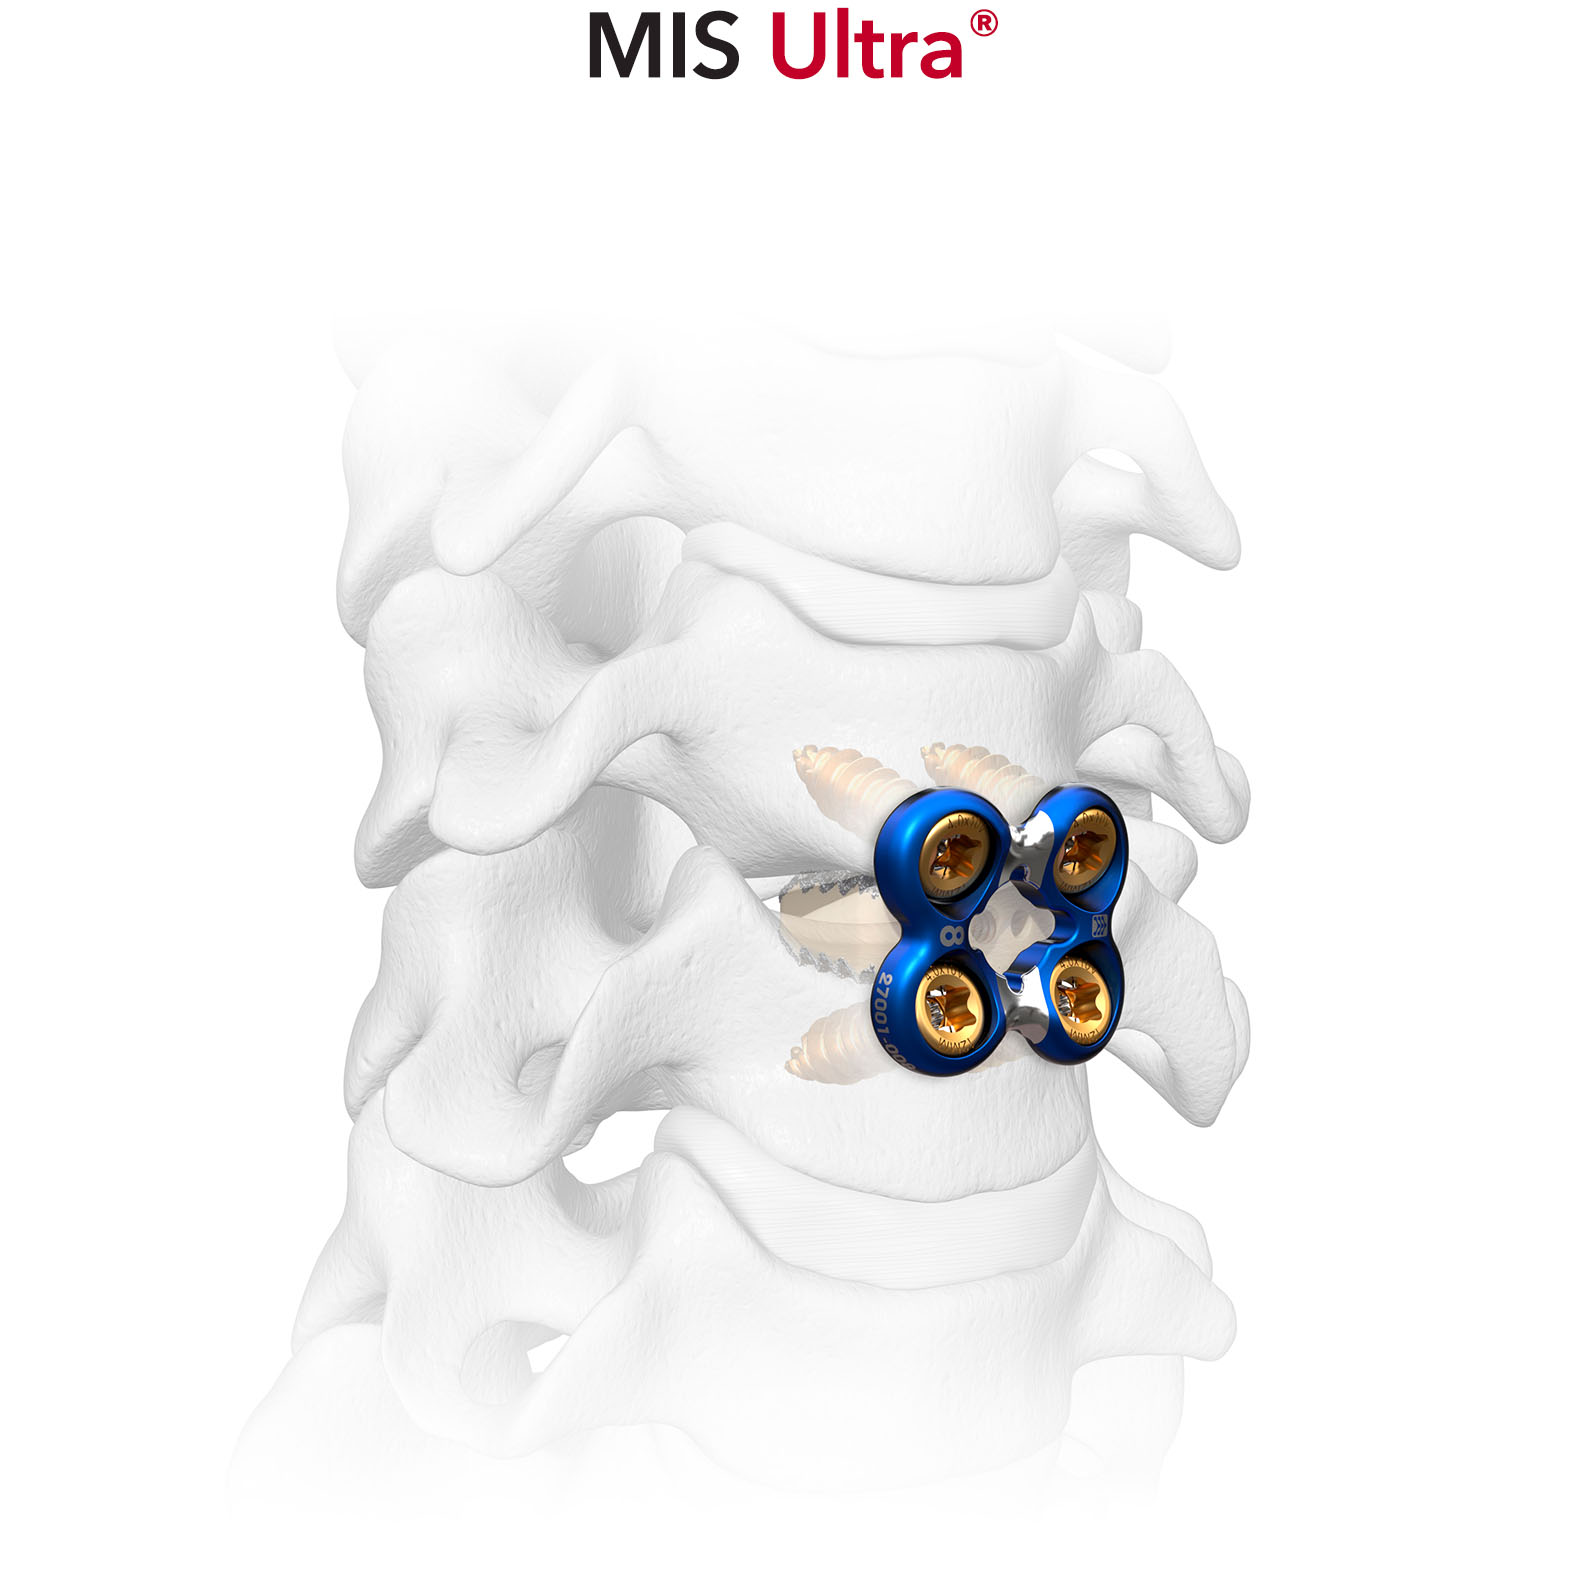 Advanced Anterior Cervical Discectomy And Fusion Acdf Solutions